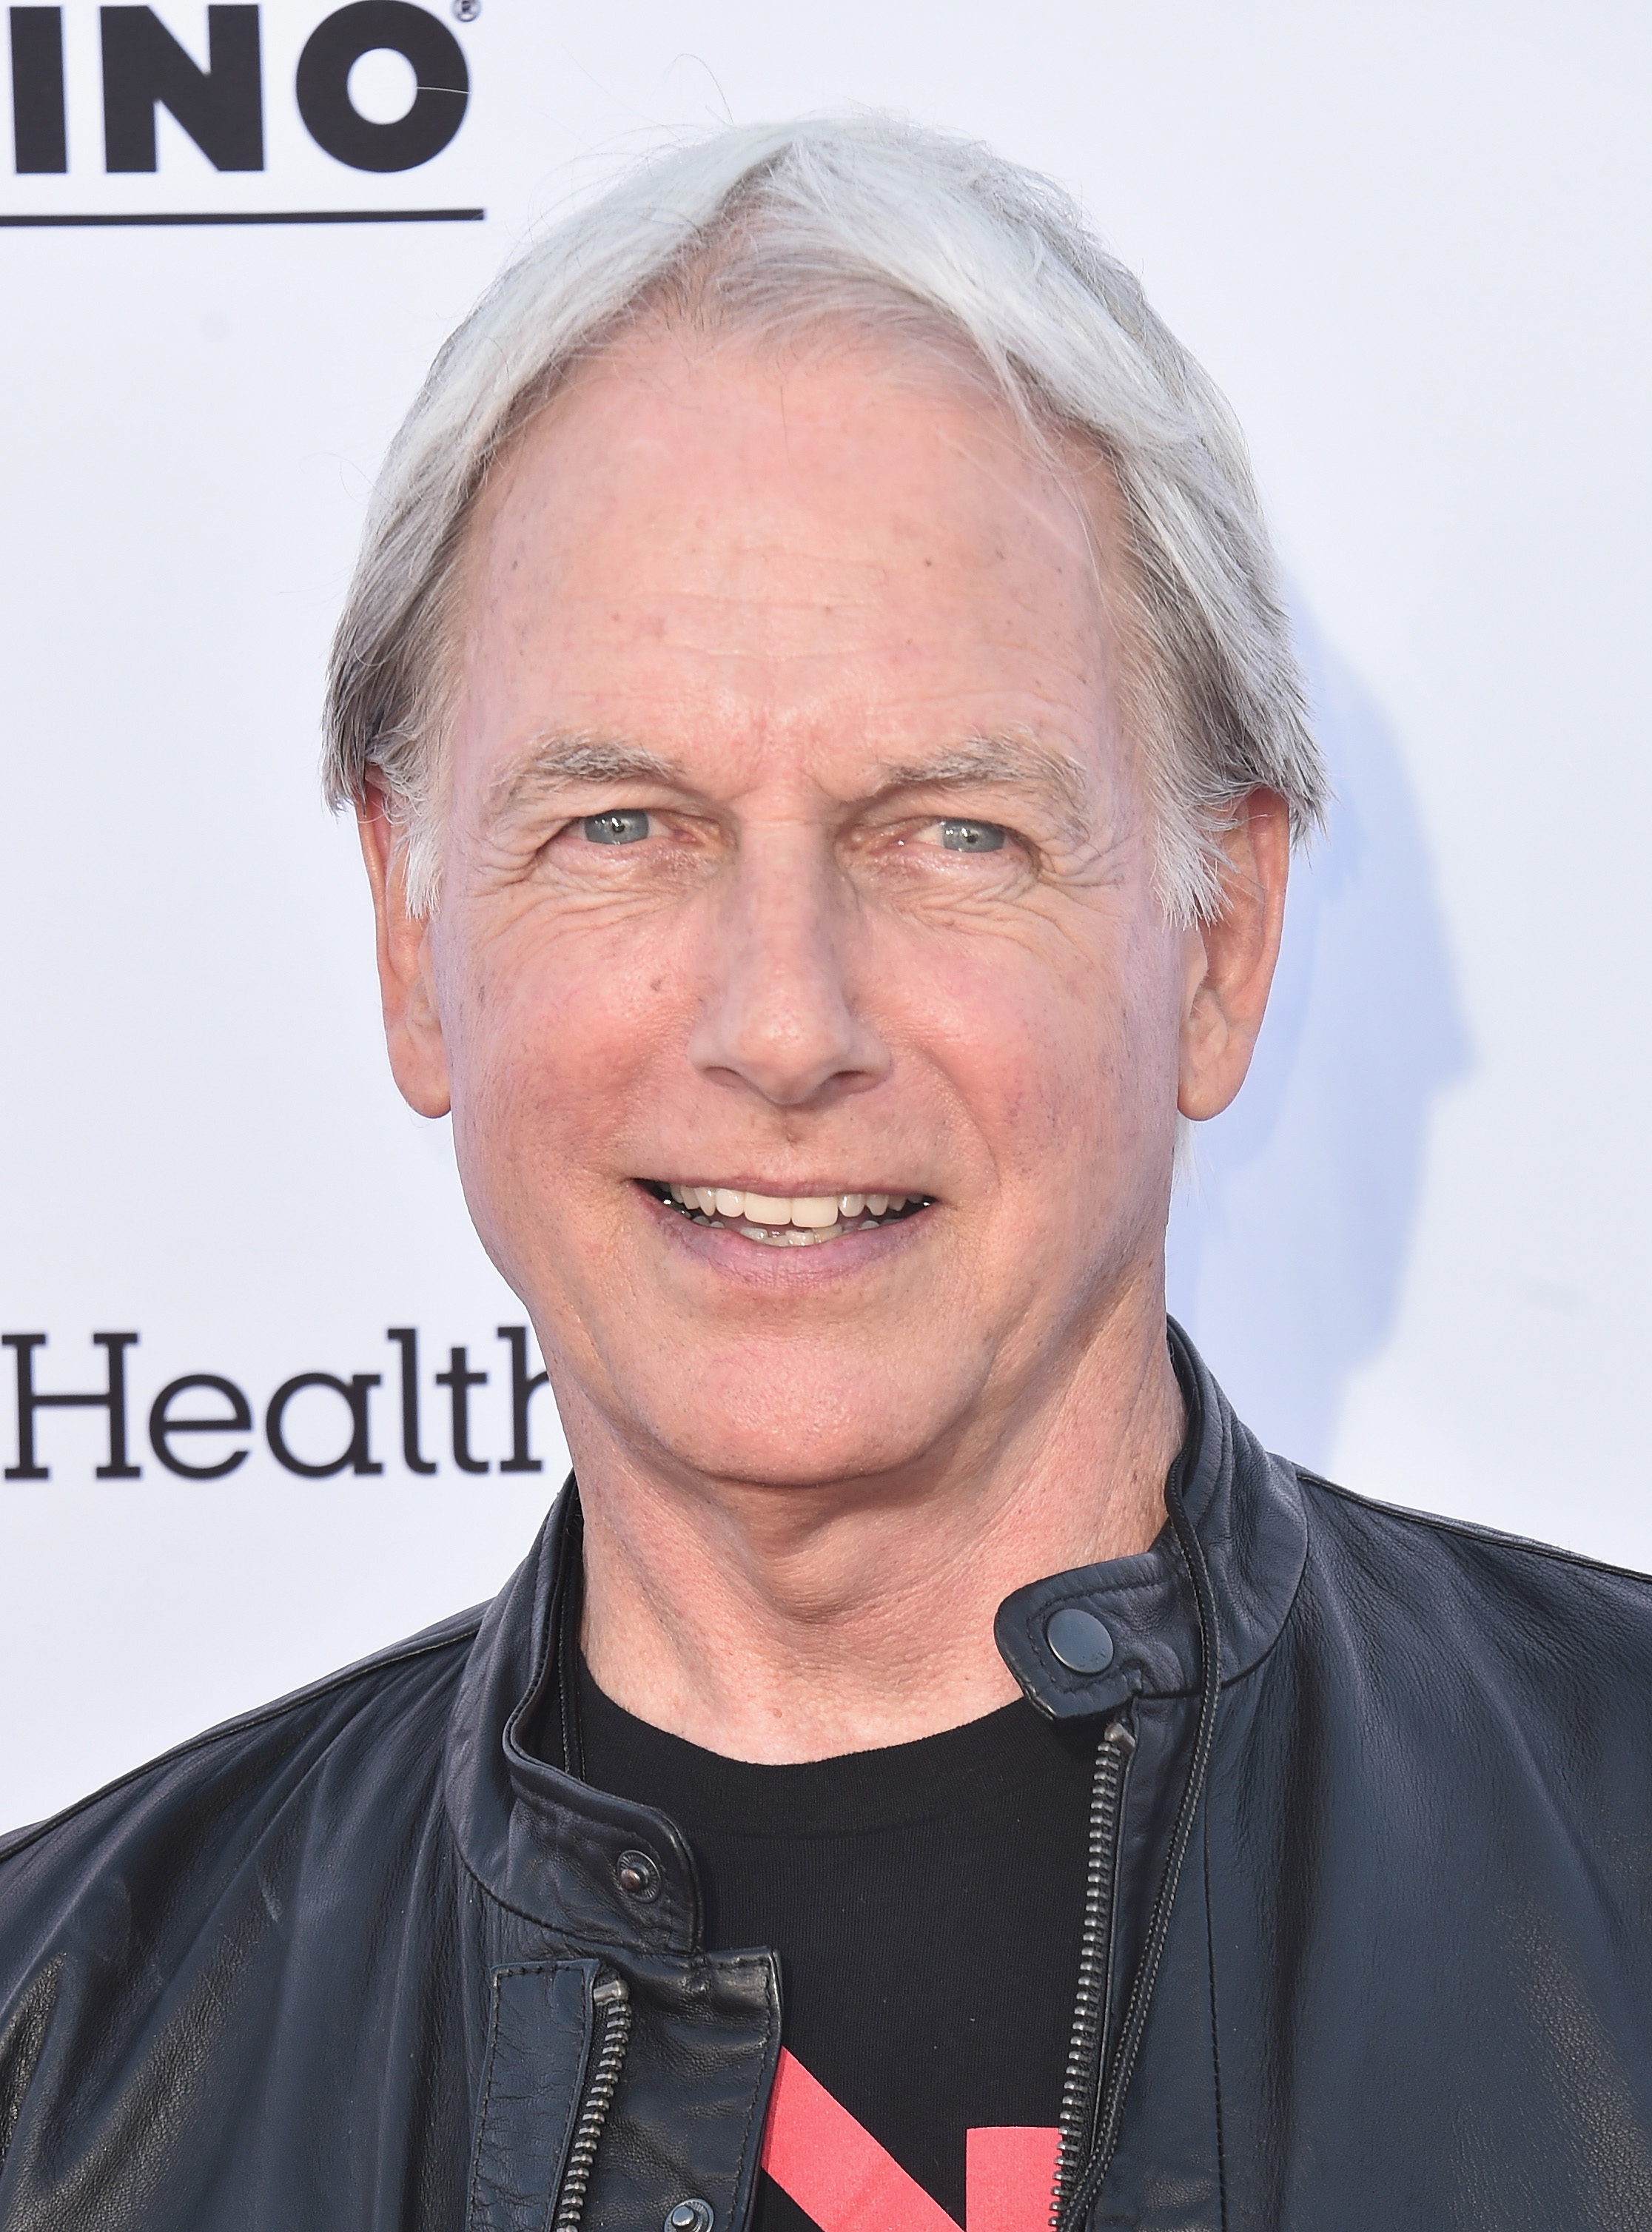 Mark Harmon at the sixth biennial Stand Up To Cancer (SU2C) telecast at the Barkar Hangar on September 7, 2018, in Santa Monica, California. | Source: Getty Images